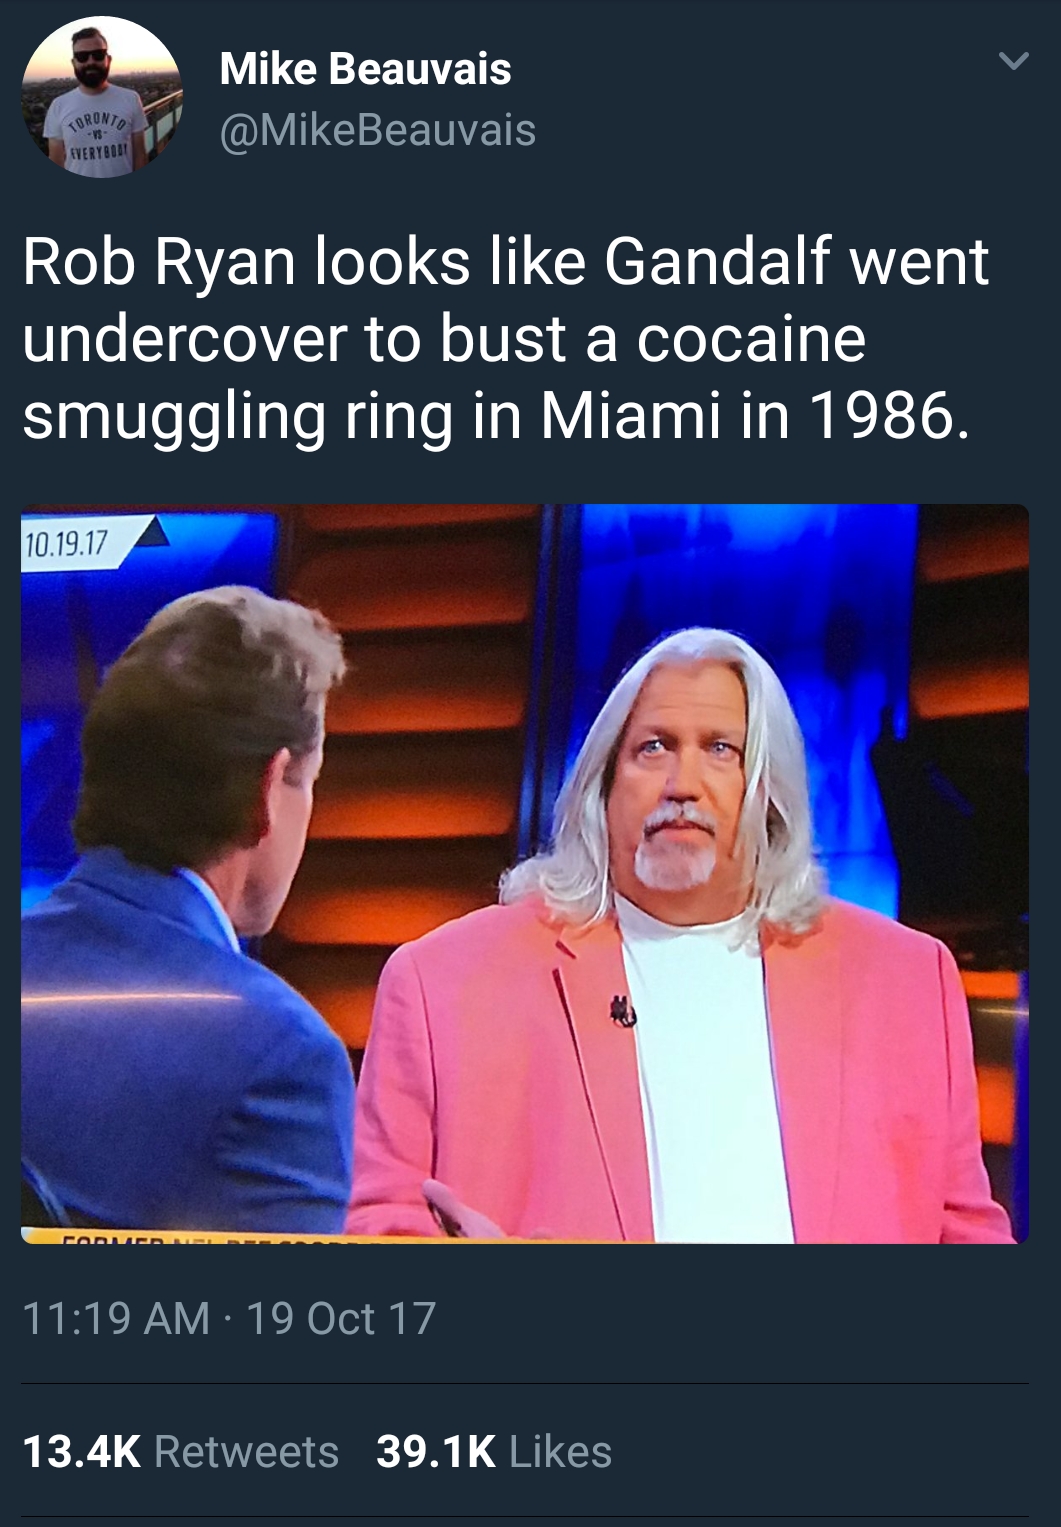 memes - rob ryan miami vice - Mike Beauvais Rob Ryan looks Gandalf went undercover to bust a cocaine smuggling ring in Miami in 1986. 10.19.17 19 Oct 17